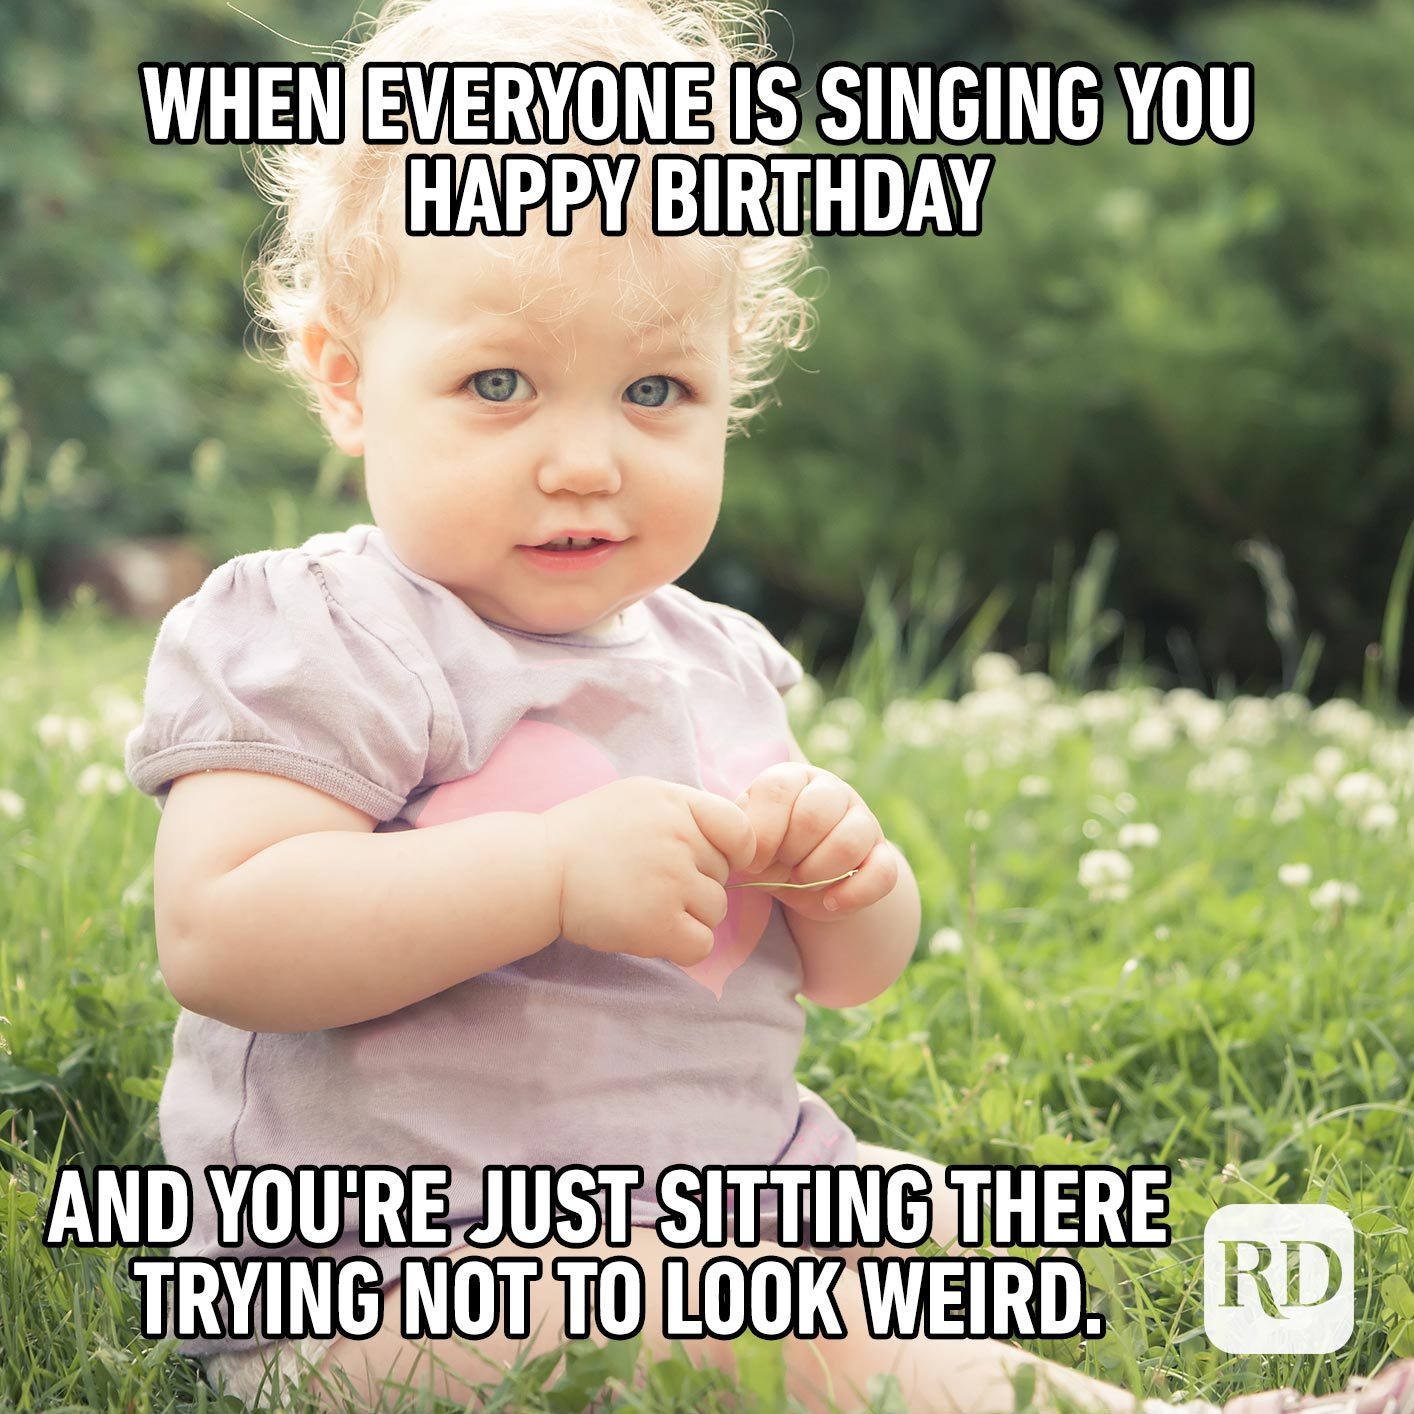 When everyone is singing you Happy Birthday and you're just sitting there trying not to look weird.